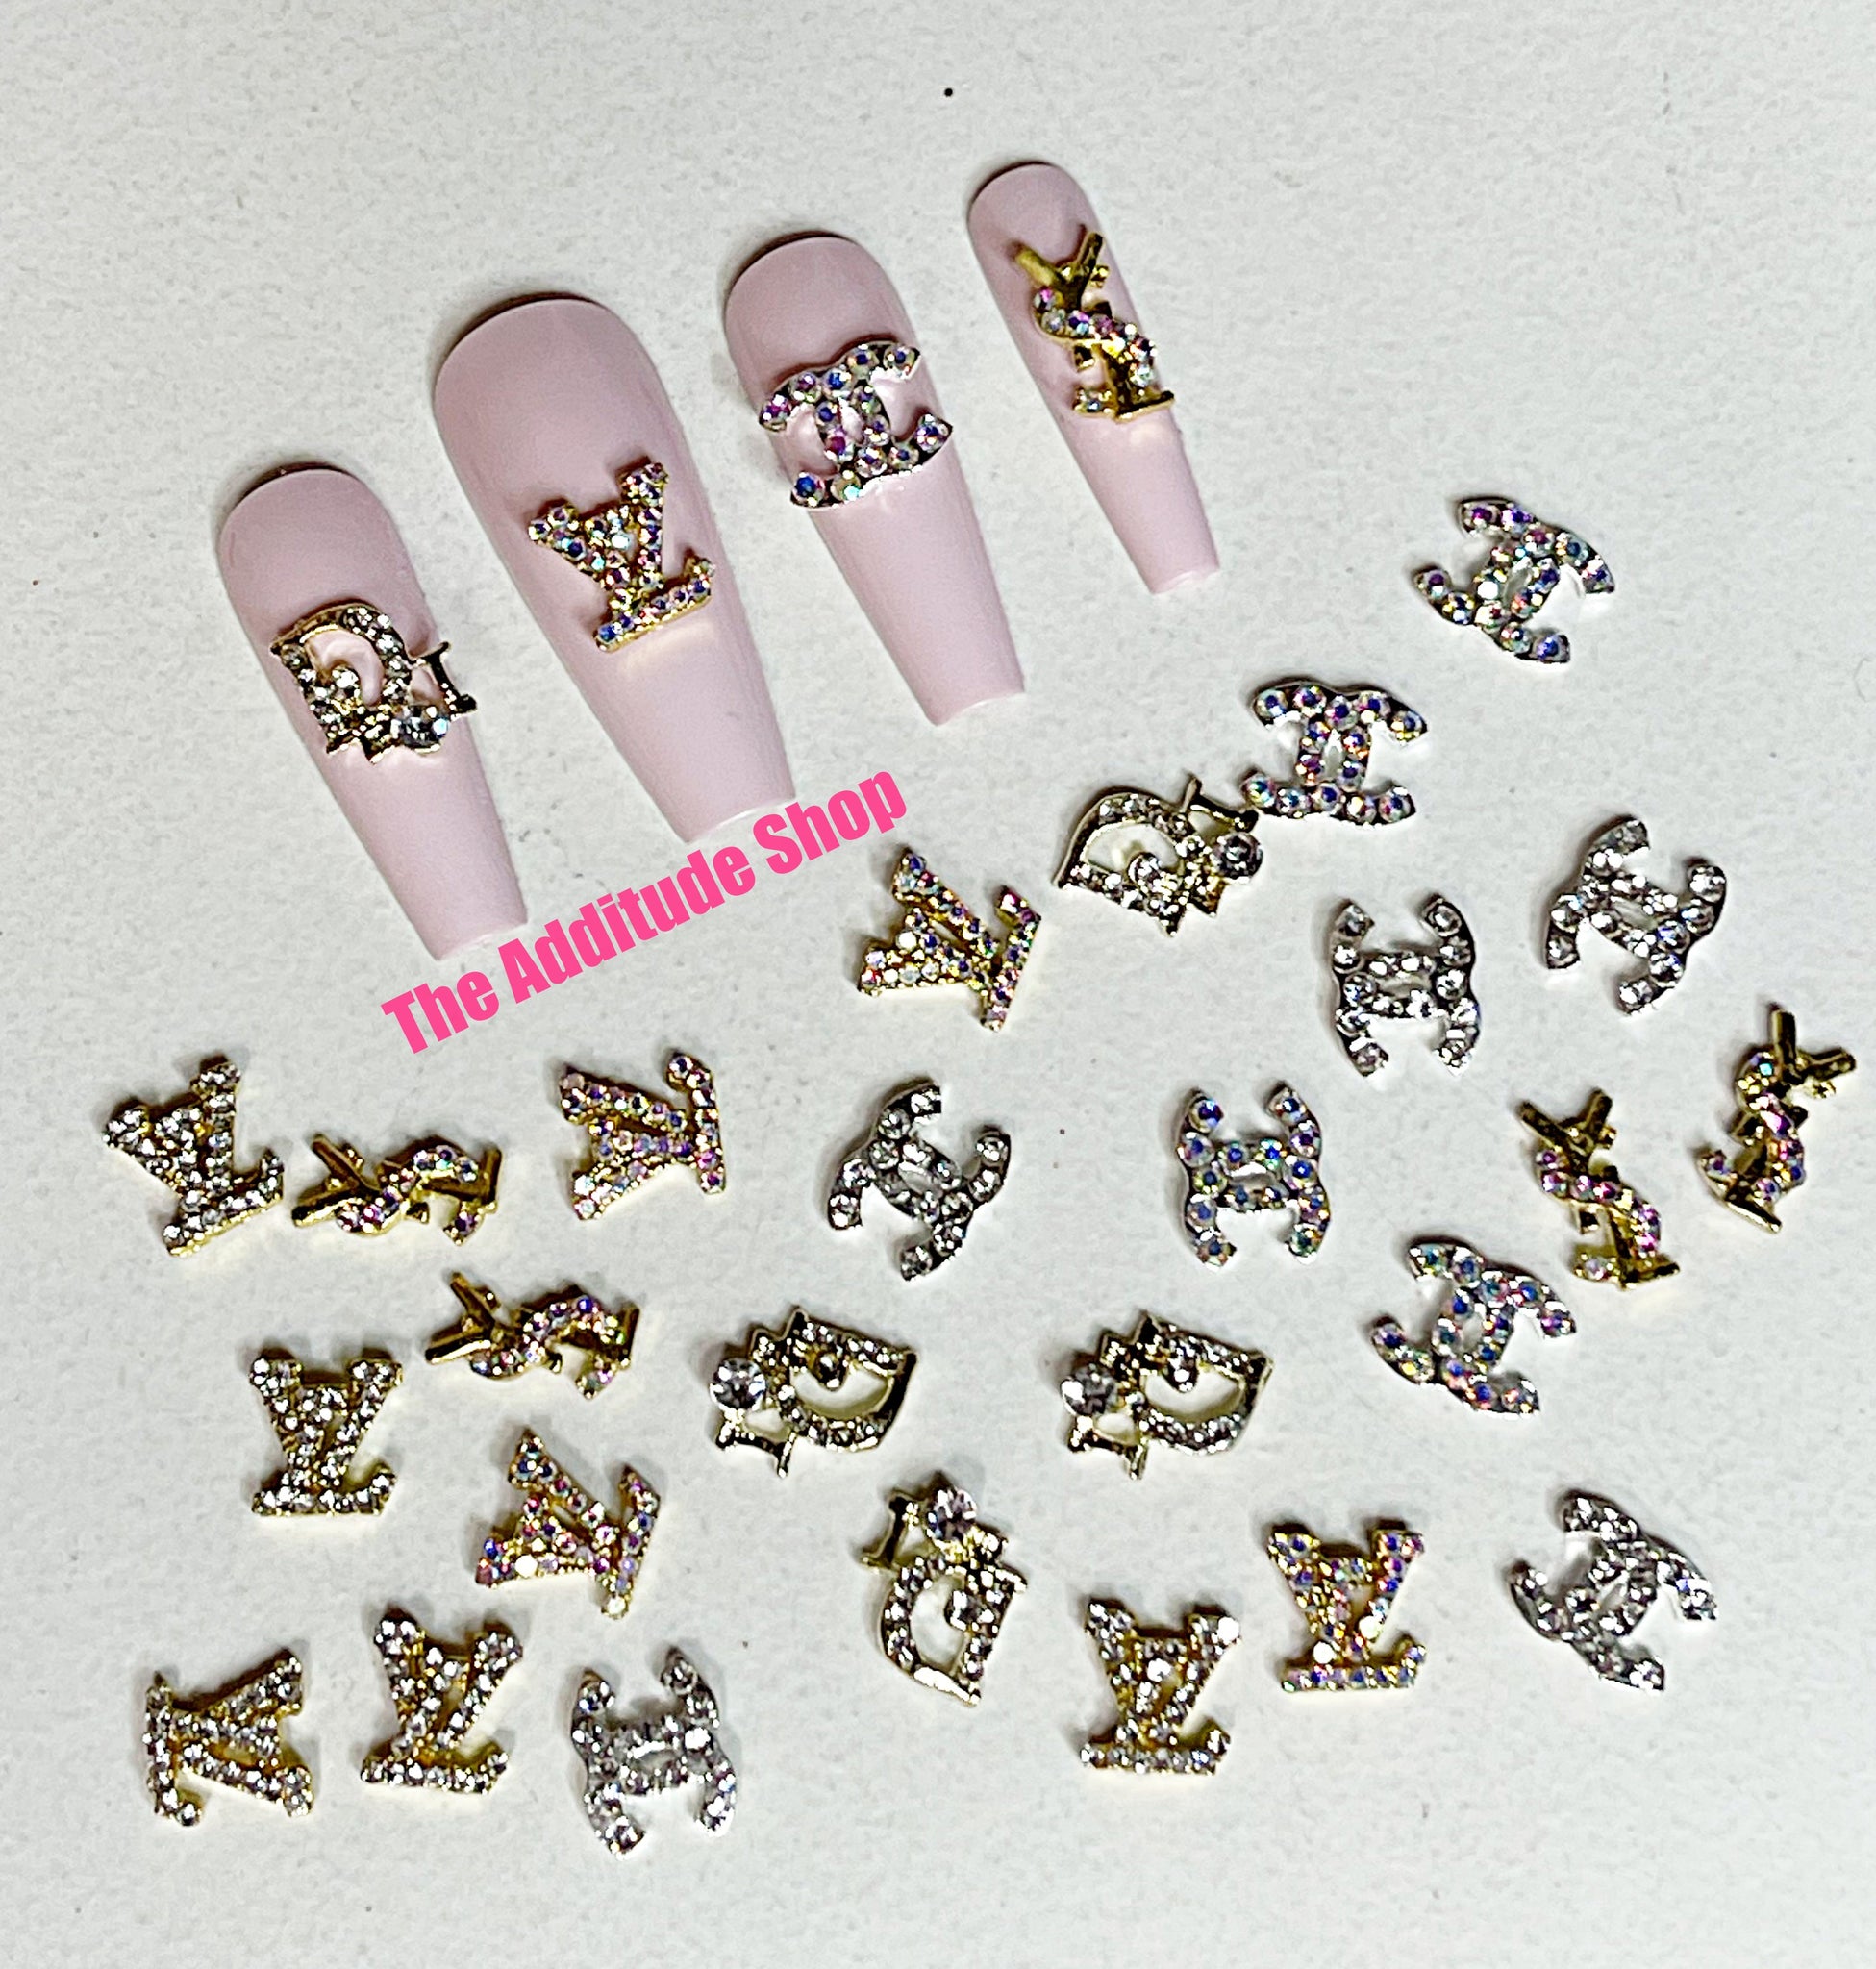 Discount DelightGet 100+ Luxury Chanel Nail Charms, chanel nail art charms